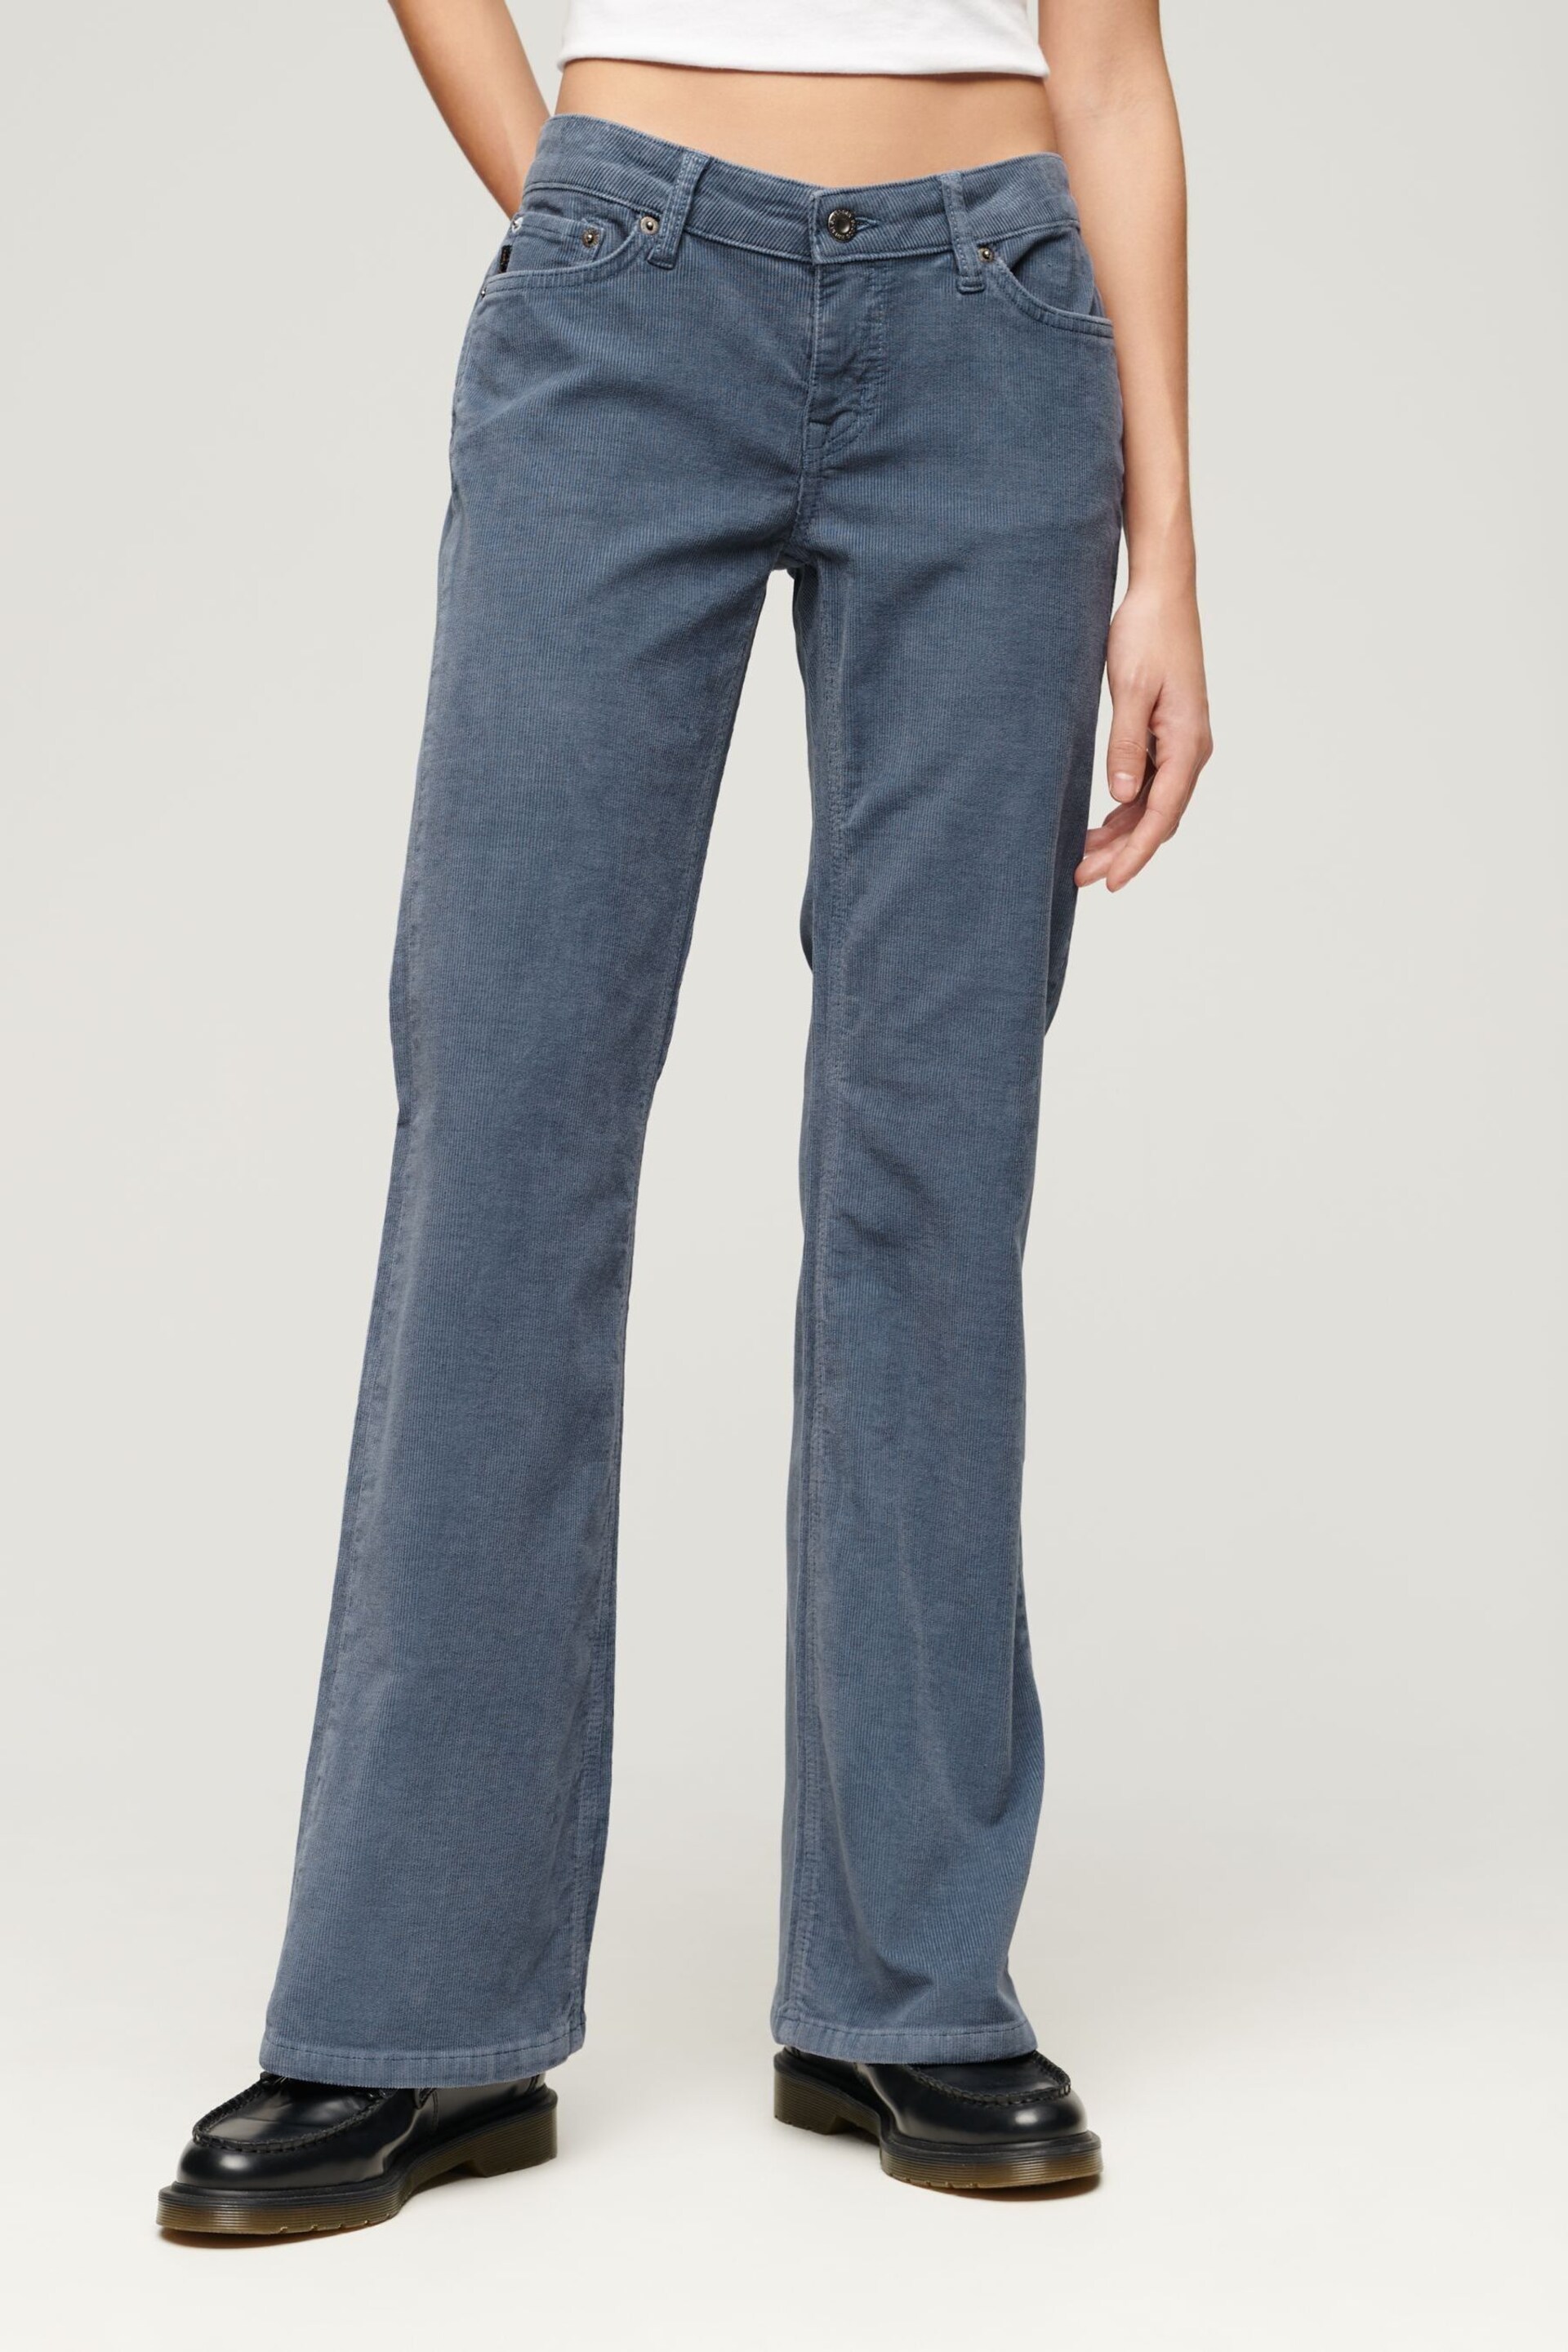 Superdry Blue Low Rise Cord Flare Jeans - Image 1 of 3